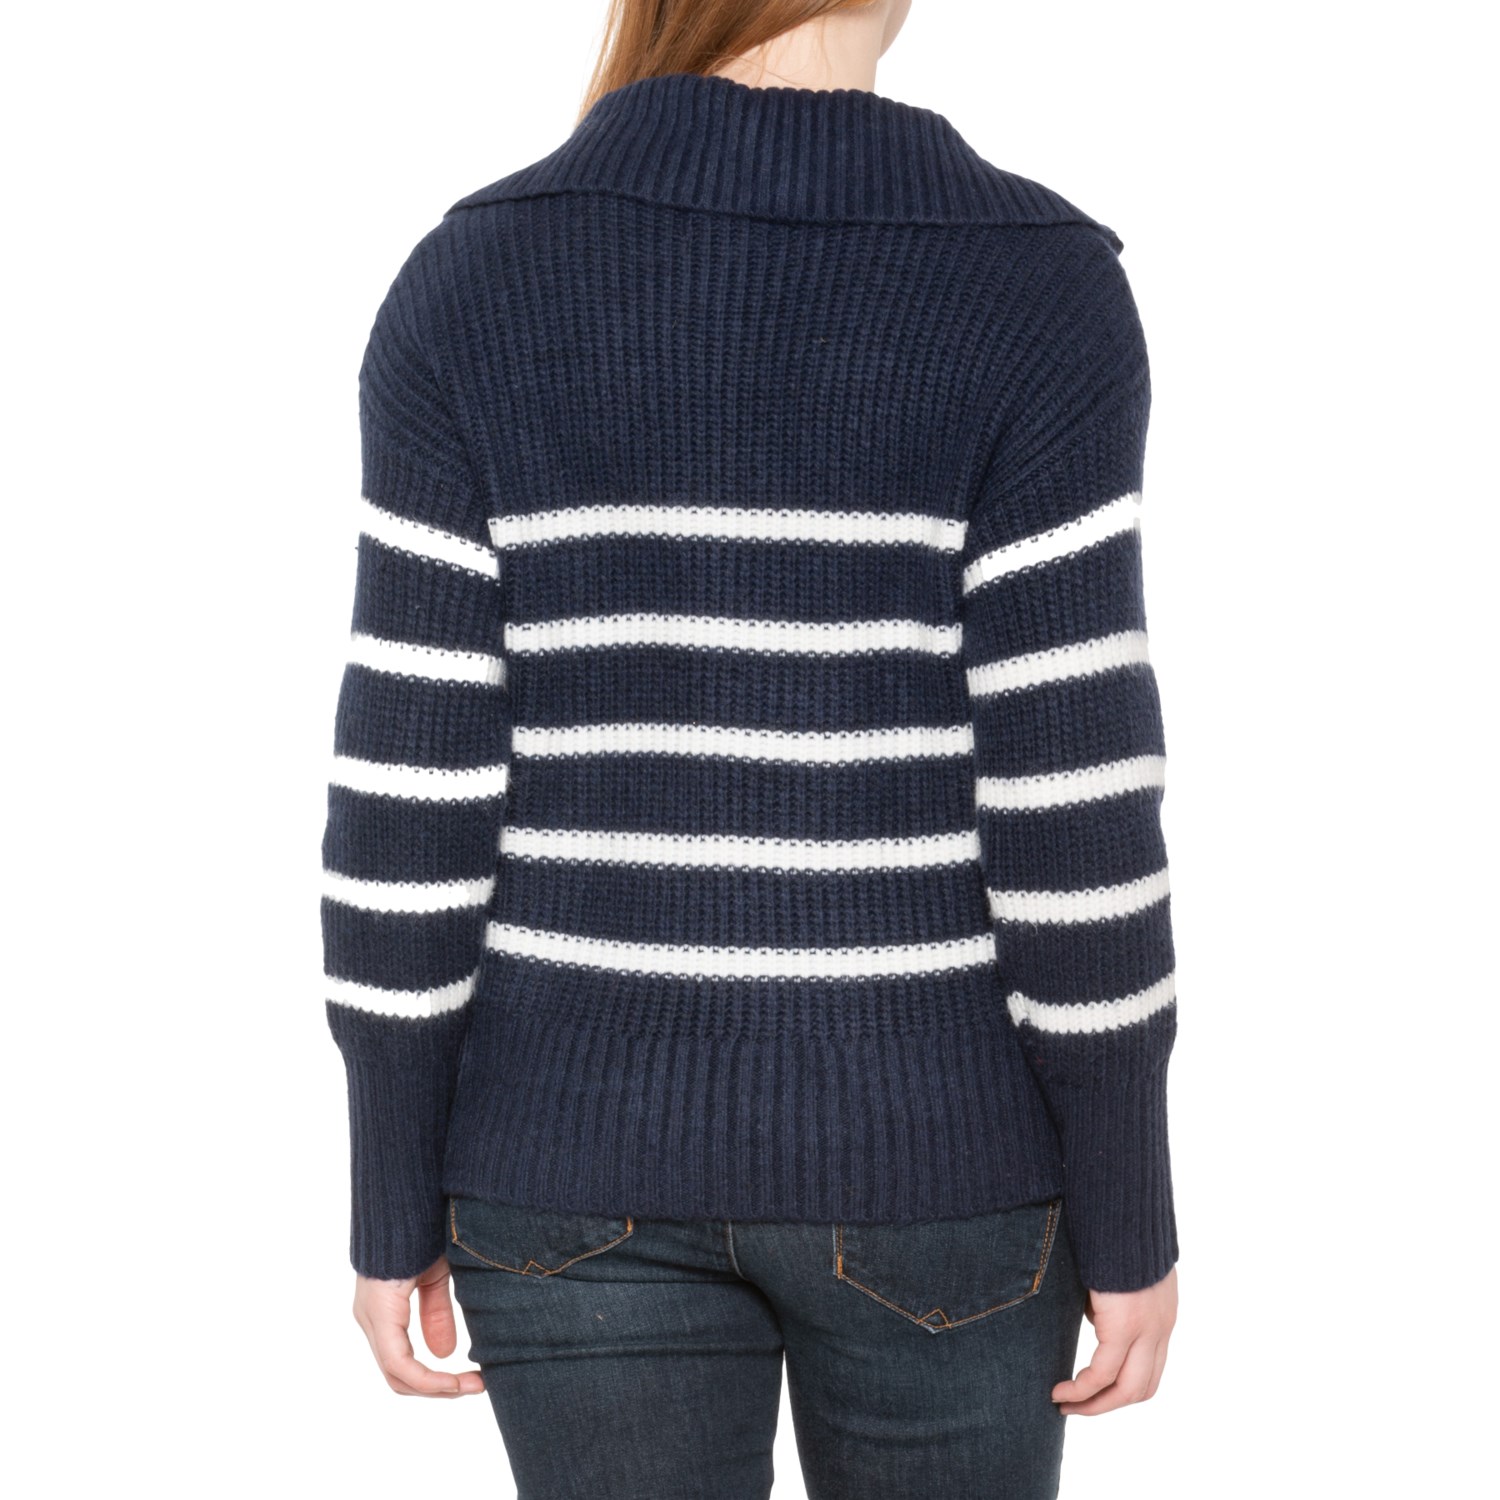 Cynthia Rowley Stripe Repeat Sweater (For Women) - Save 68%